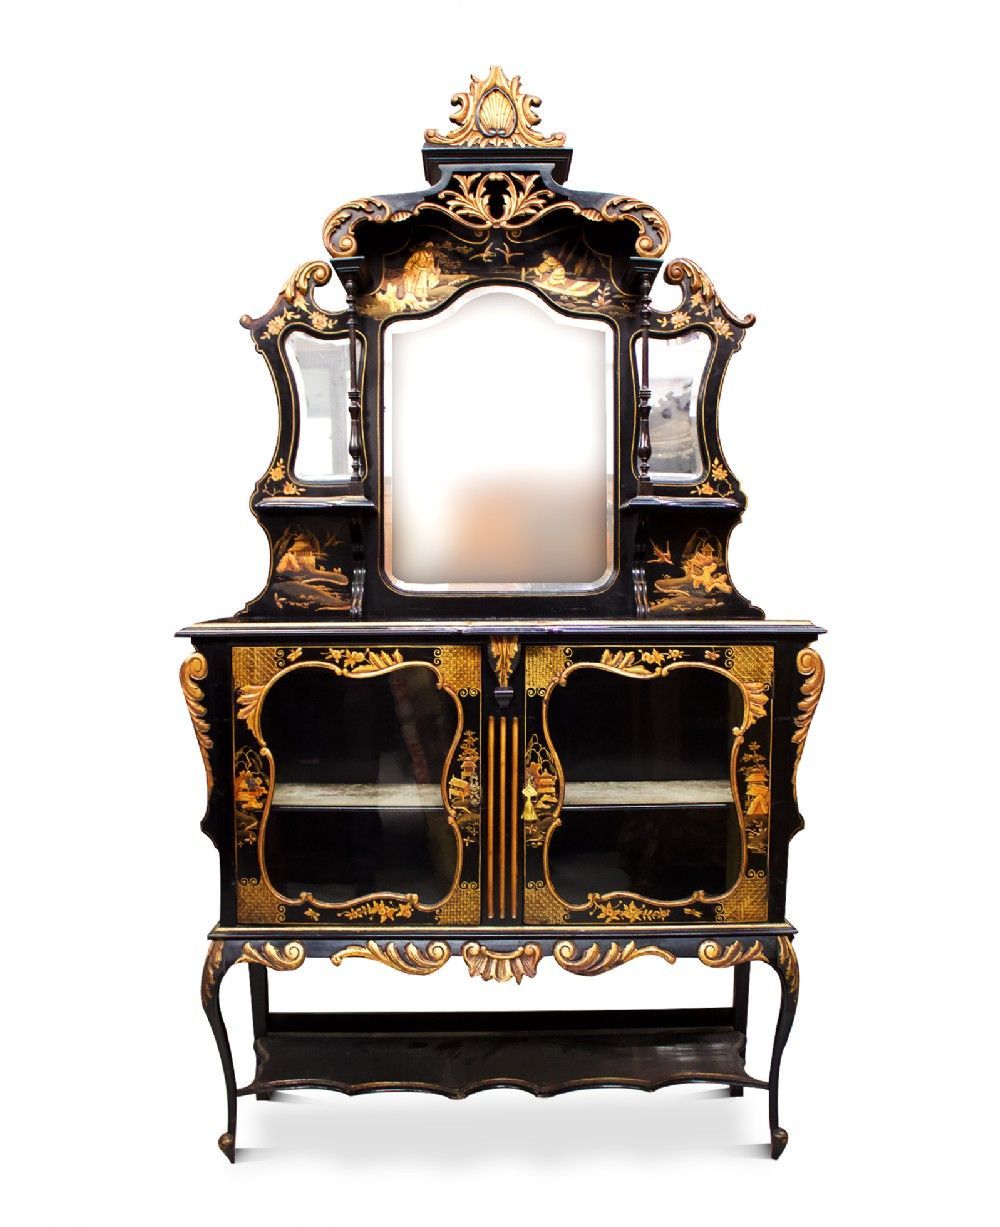 Antique Chinoiserie Decorated Lacquered Ebonised Cabinet